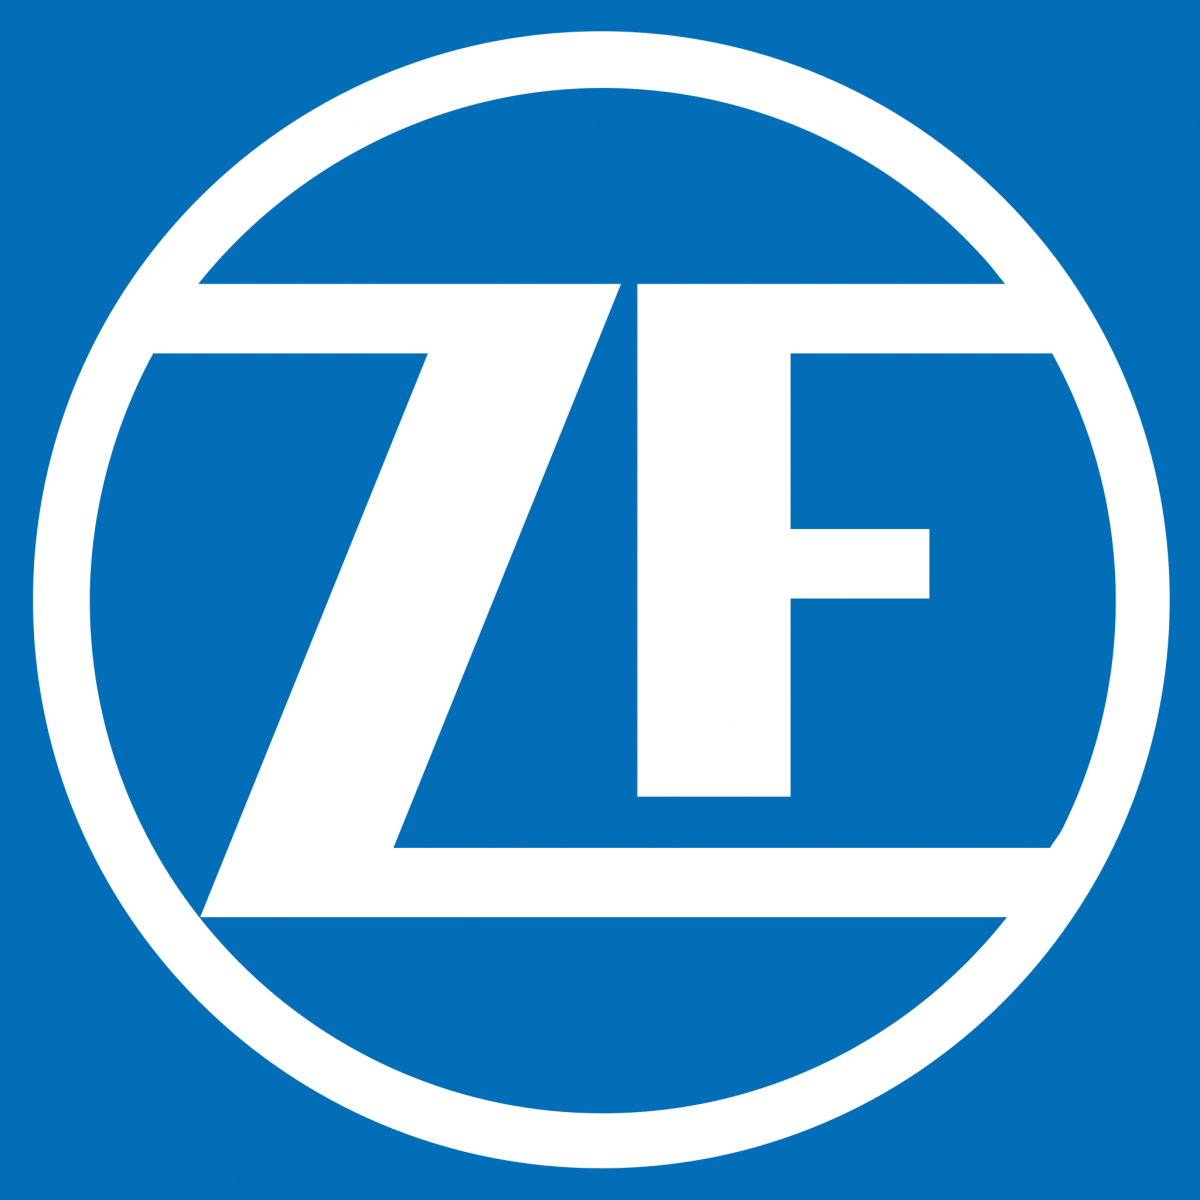 Link goes to zf.com, image is ZF logo